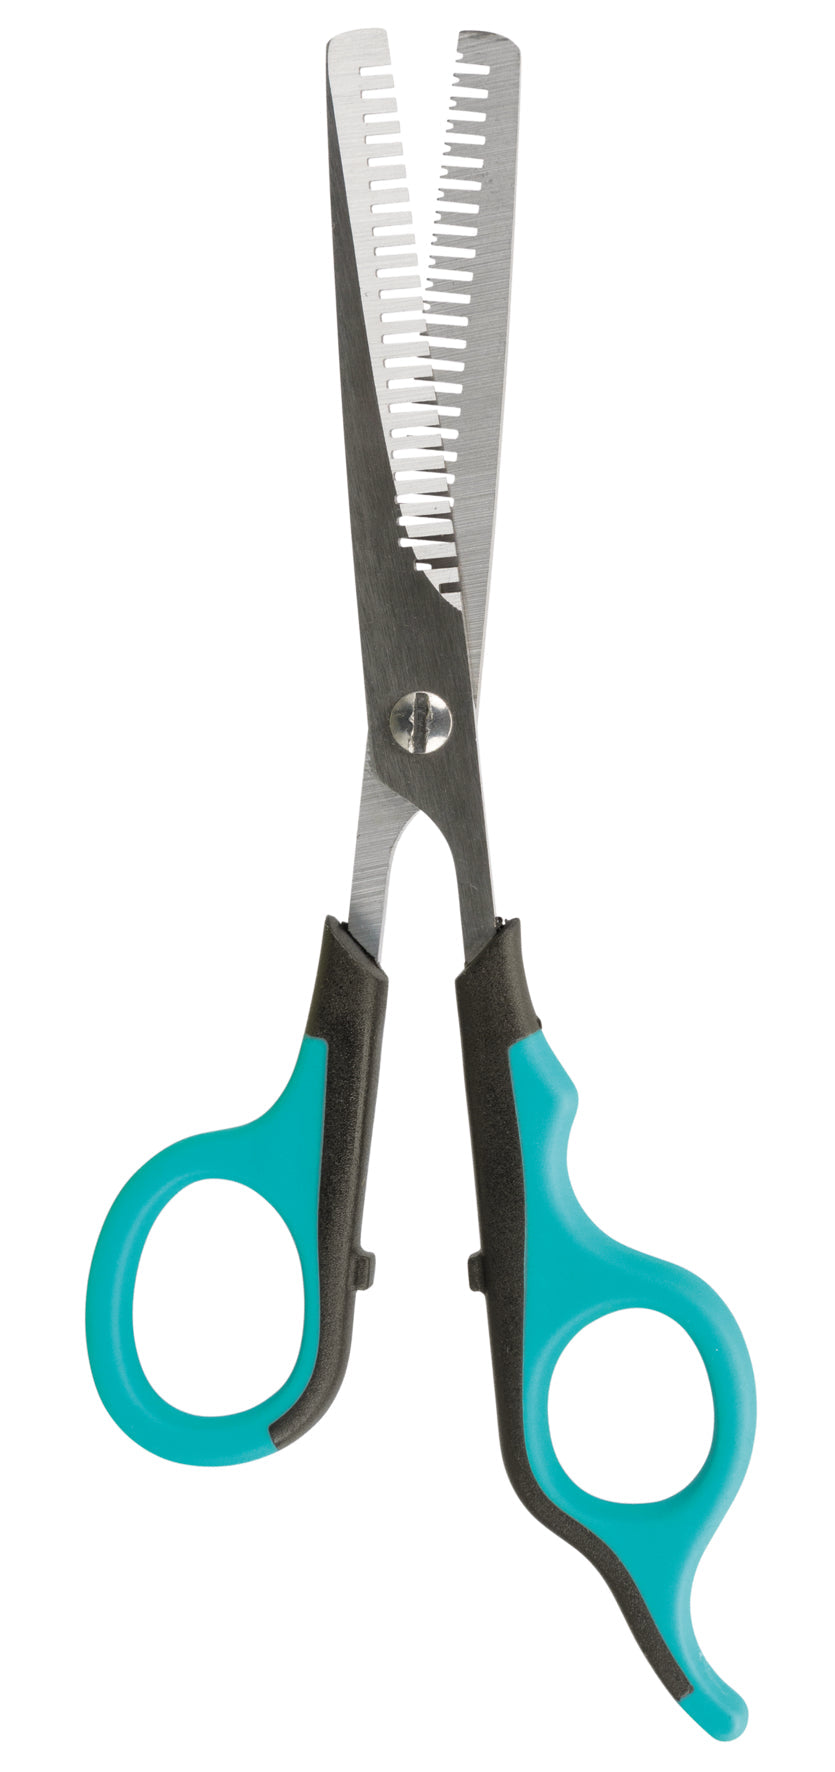 Trixie Thinning Scissors, Double-Sided, 18 cm - Petsgool Online